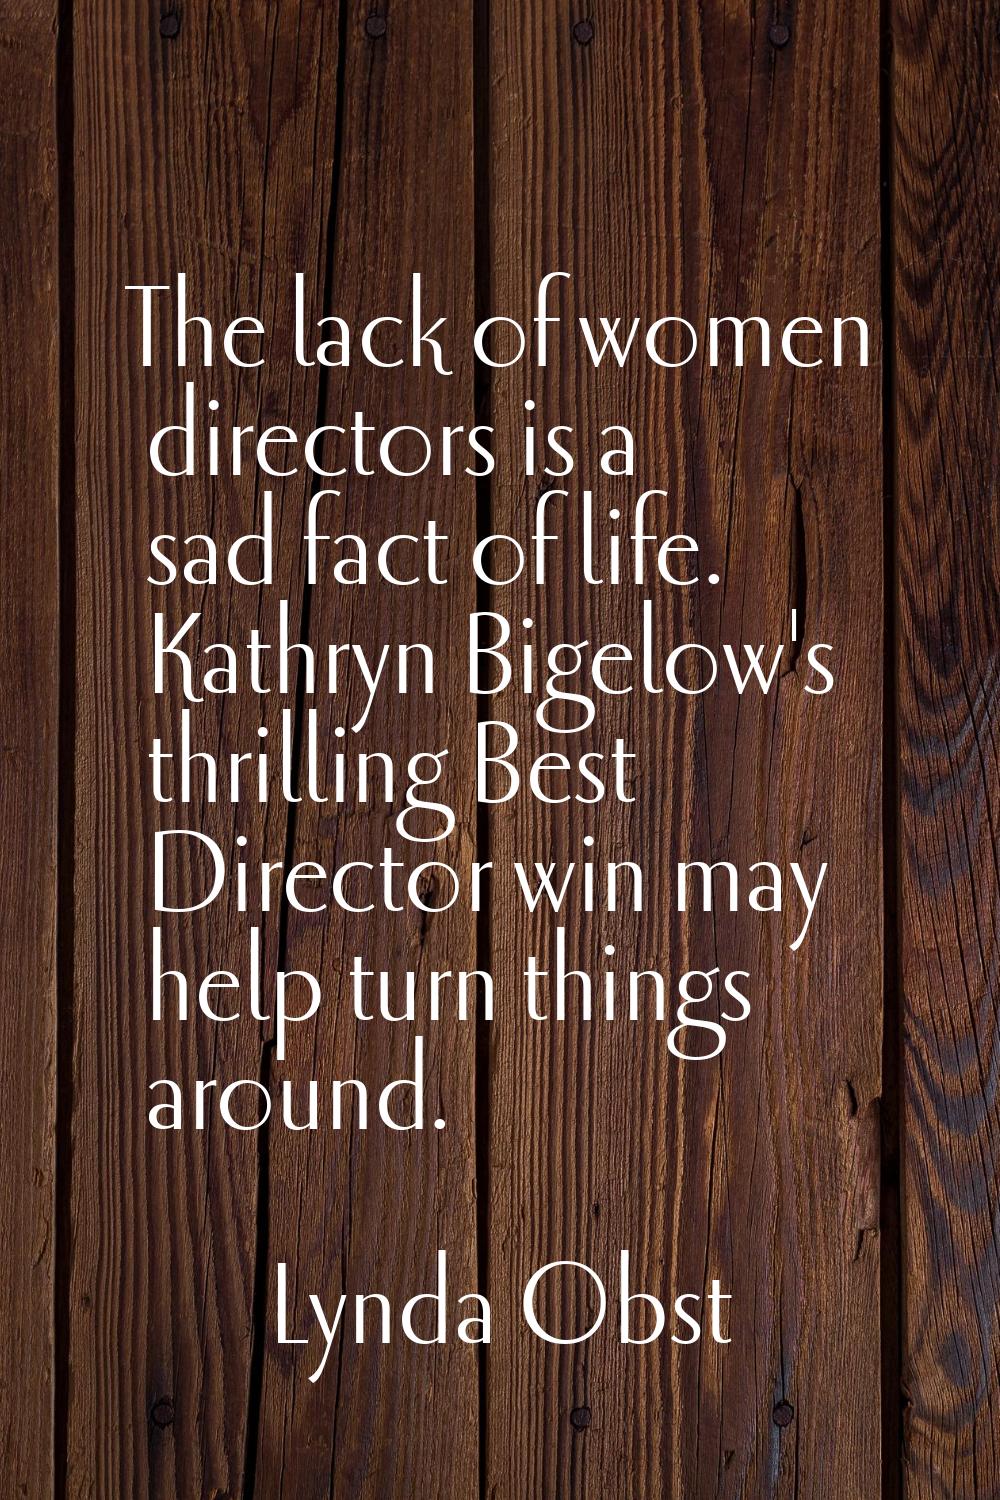 The lack of women directors is a sad fact of life. Kathryn Bigelow's thrilling Best Director win ma